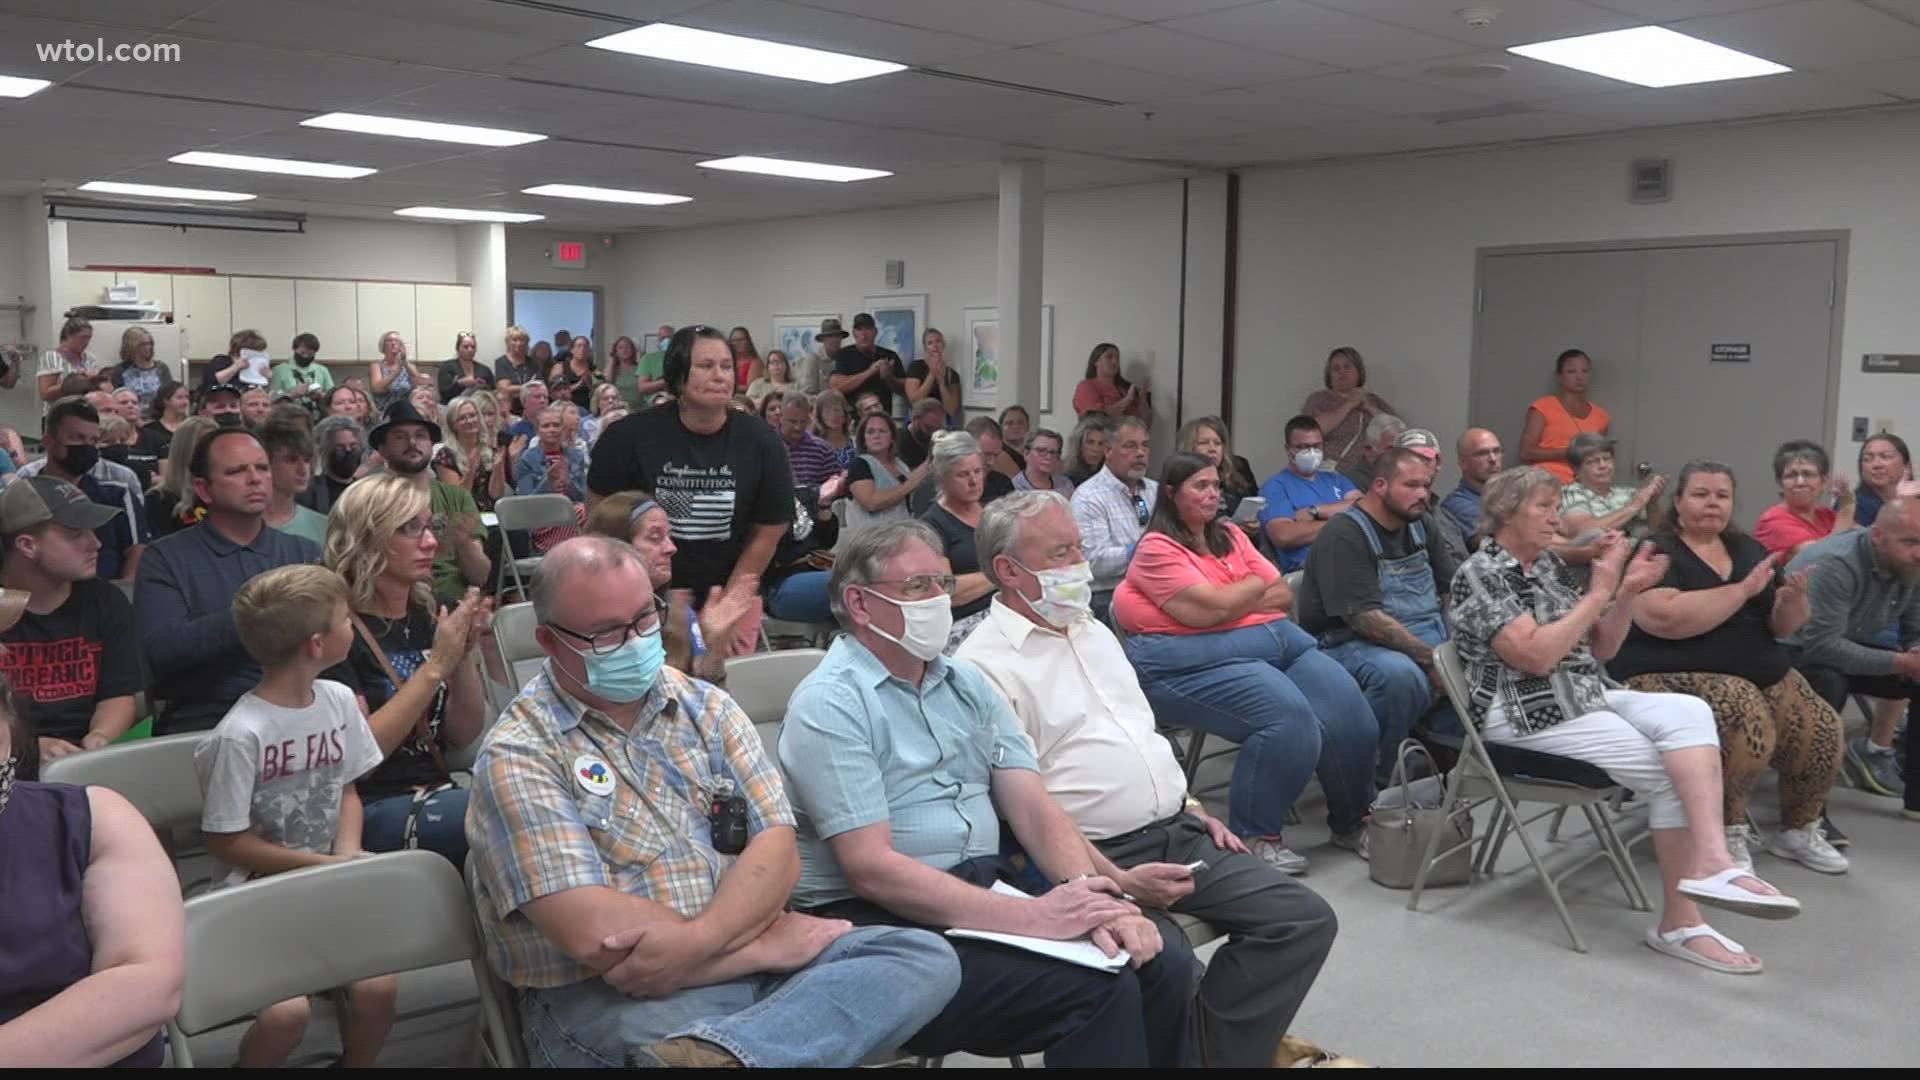 The meeting discussed how to control and prevent COVID-19 in schools, with the possibility of a mask mandate. Members of the public weighed in on the hot topic.